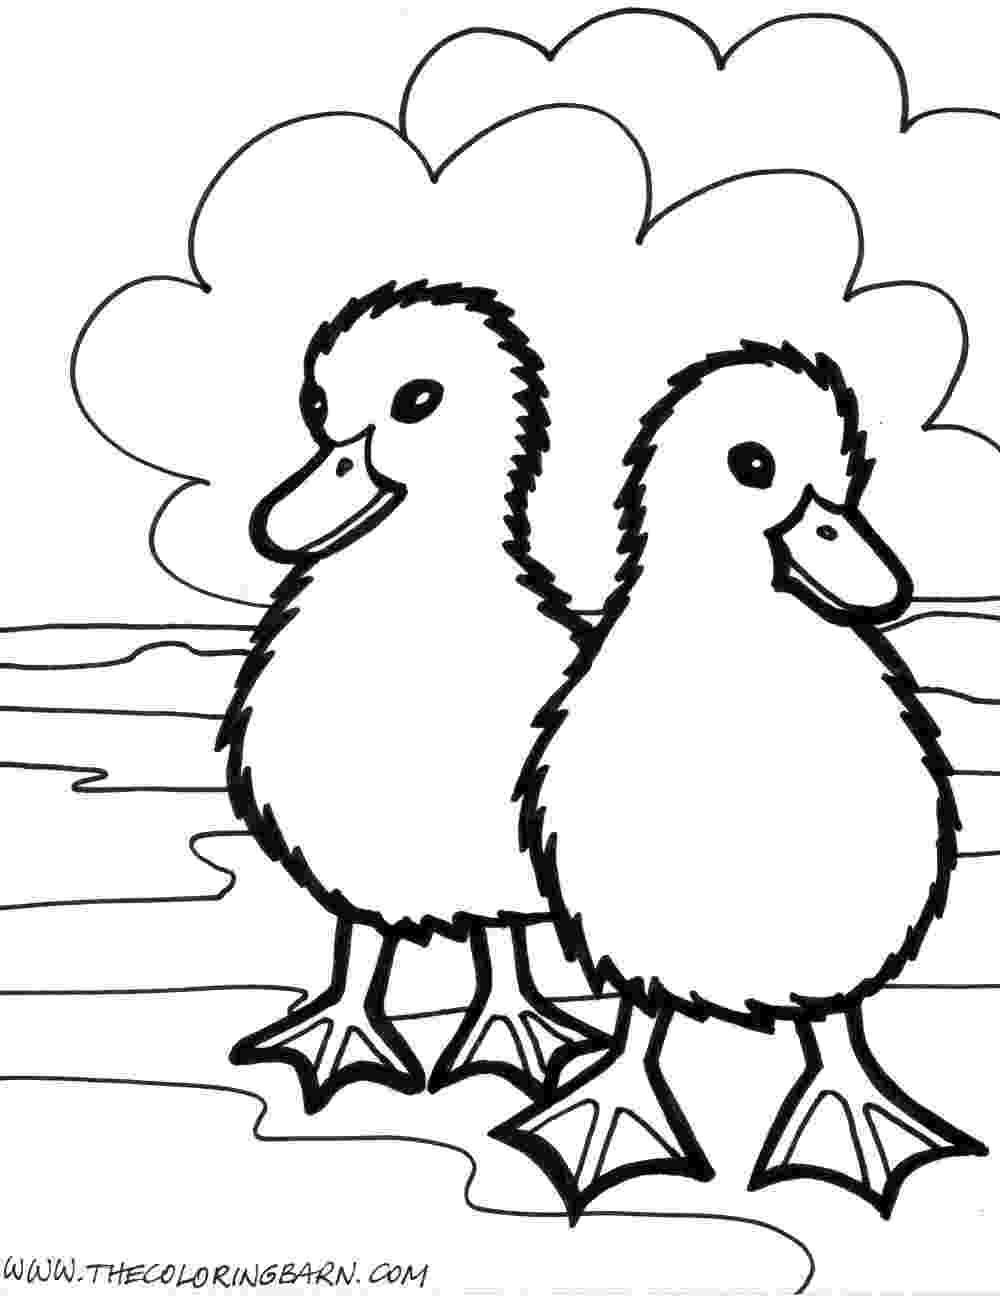 coloring pages of animals all animals coloring pages download and print for free pages animals coloring of 